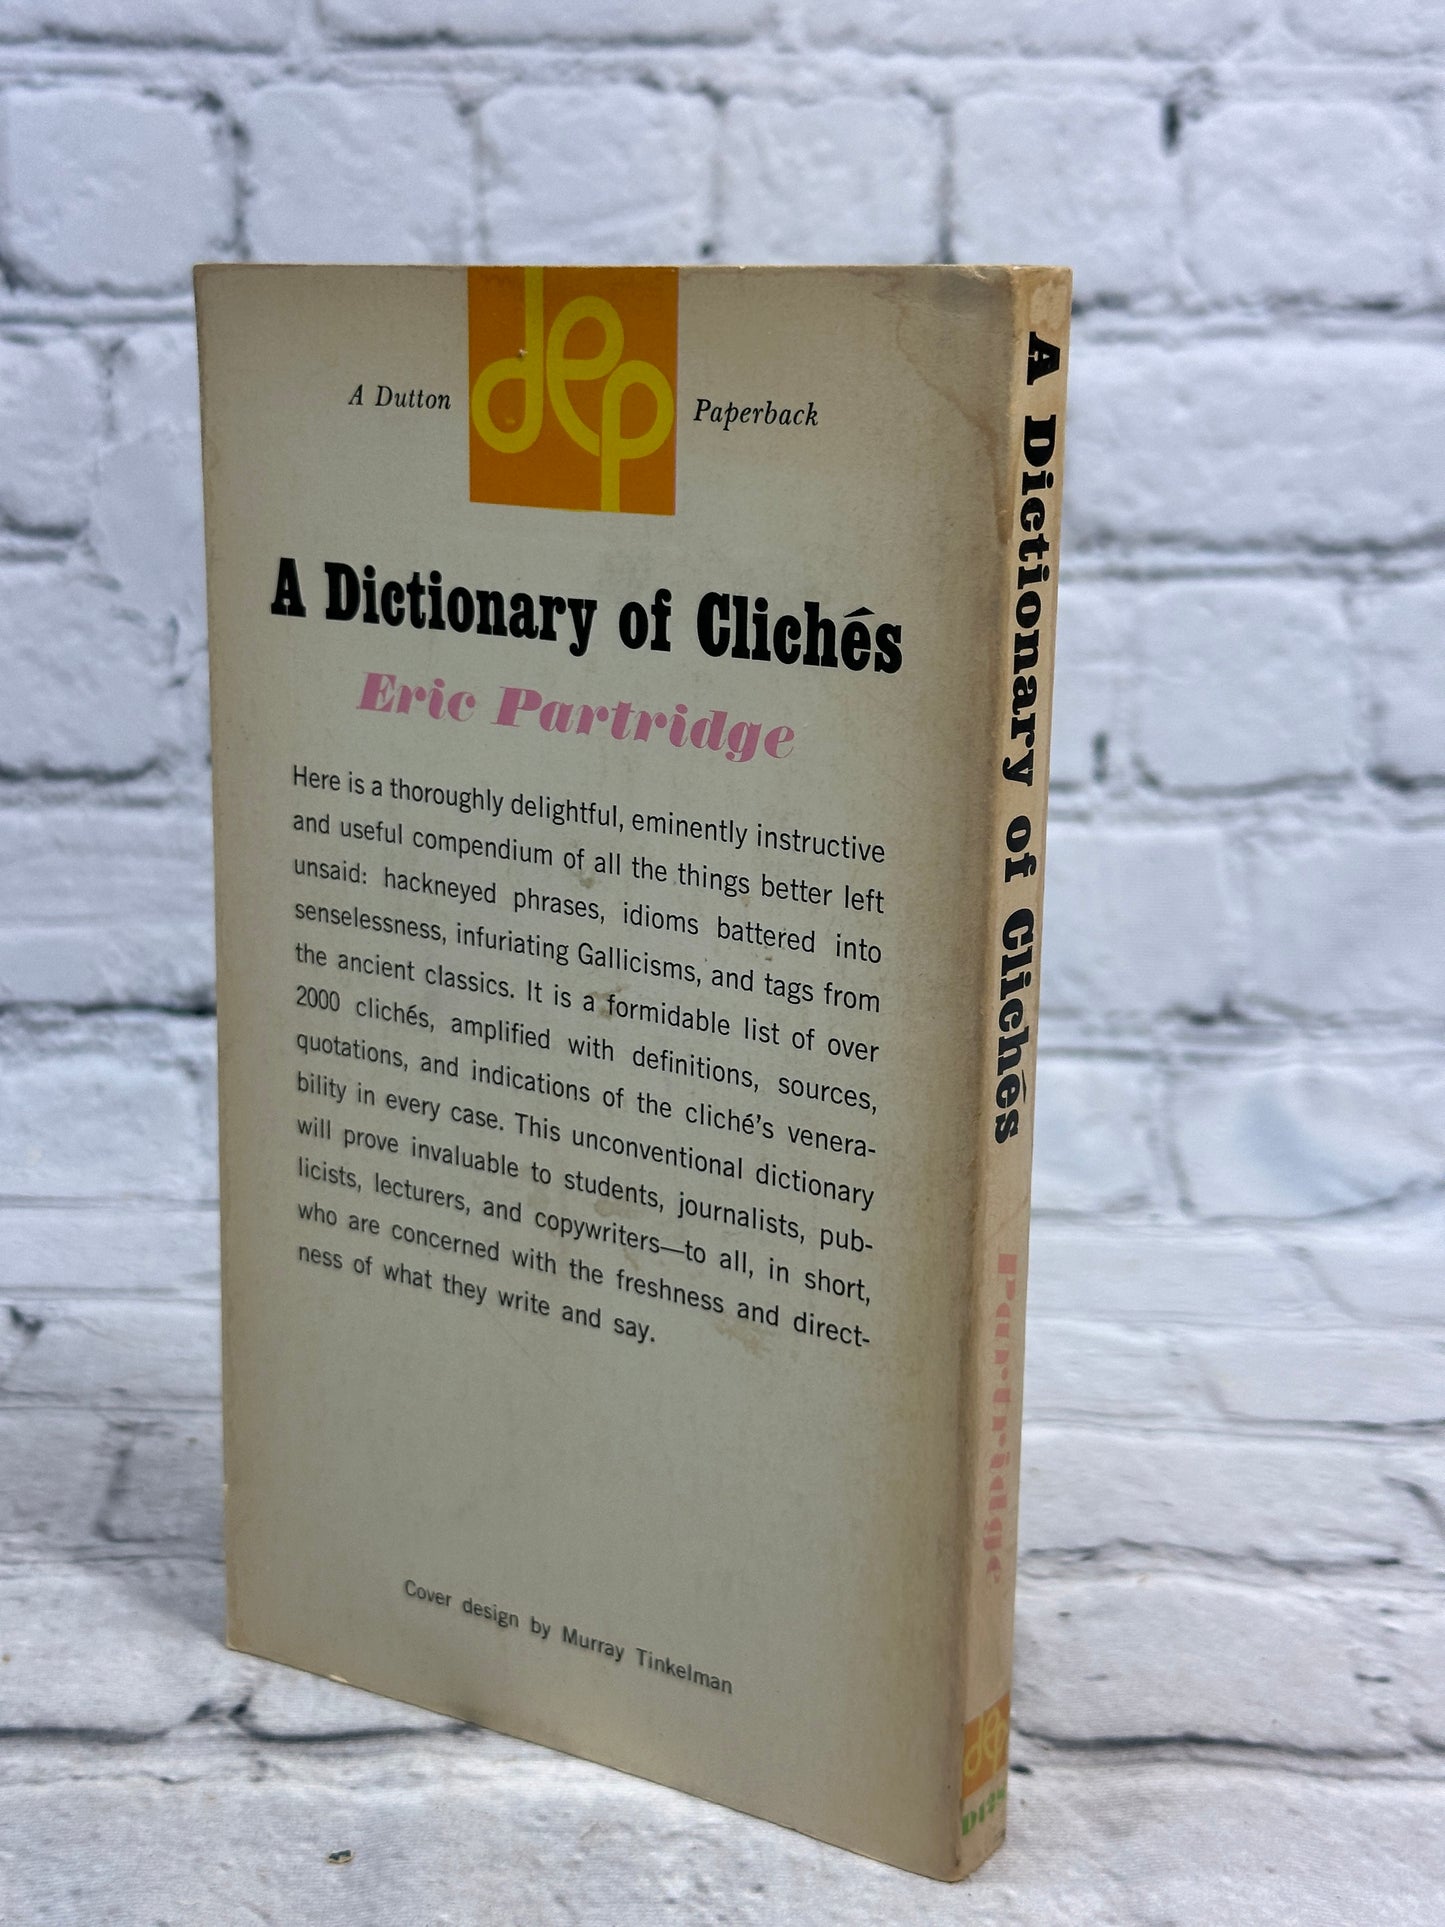 A Dictionary of Cliches by Eric Partridge [1963]